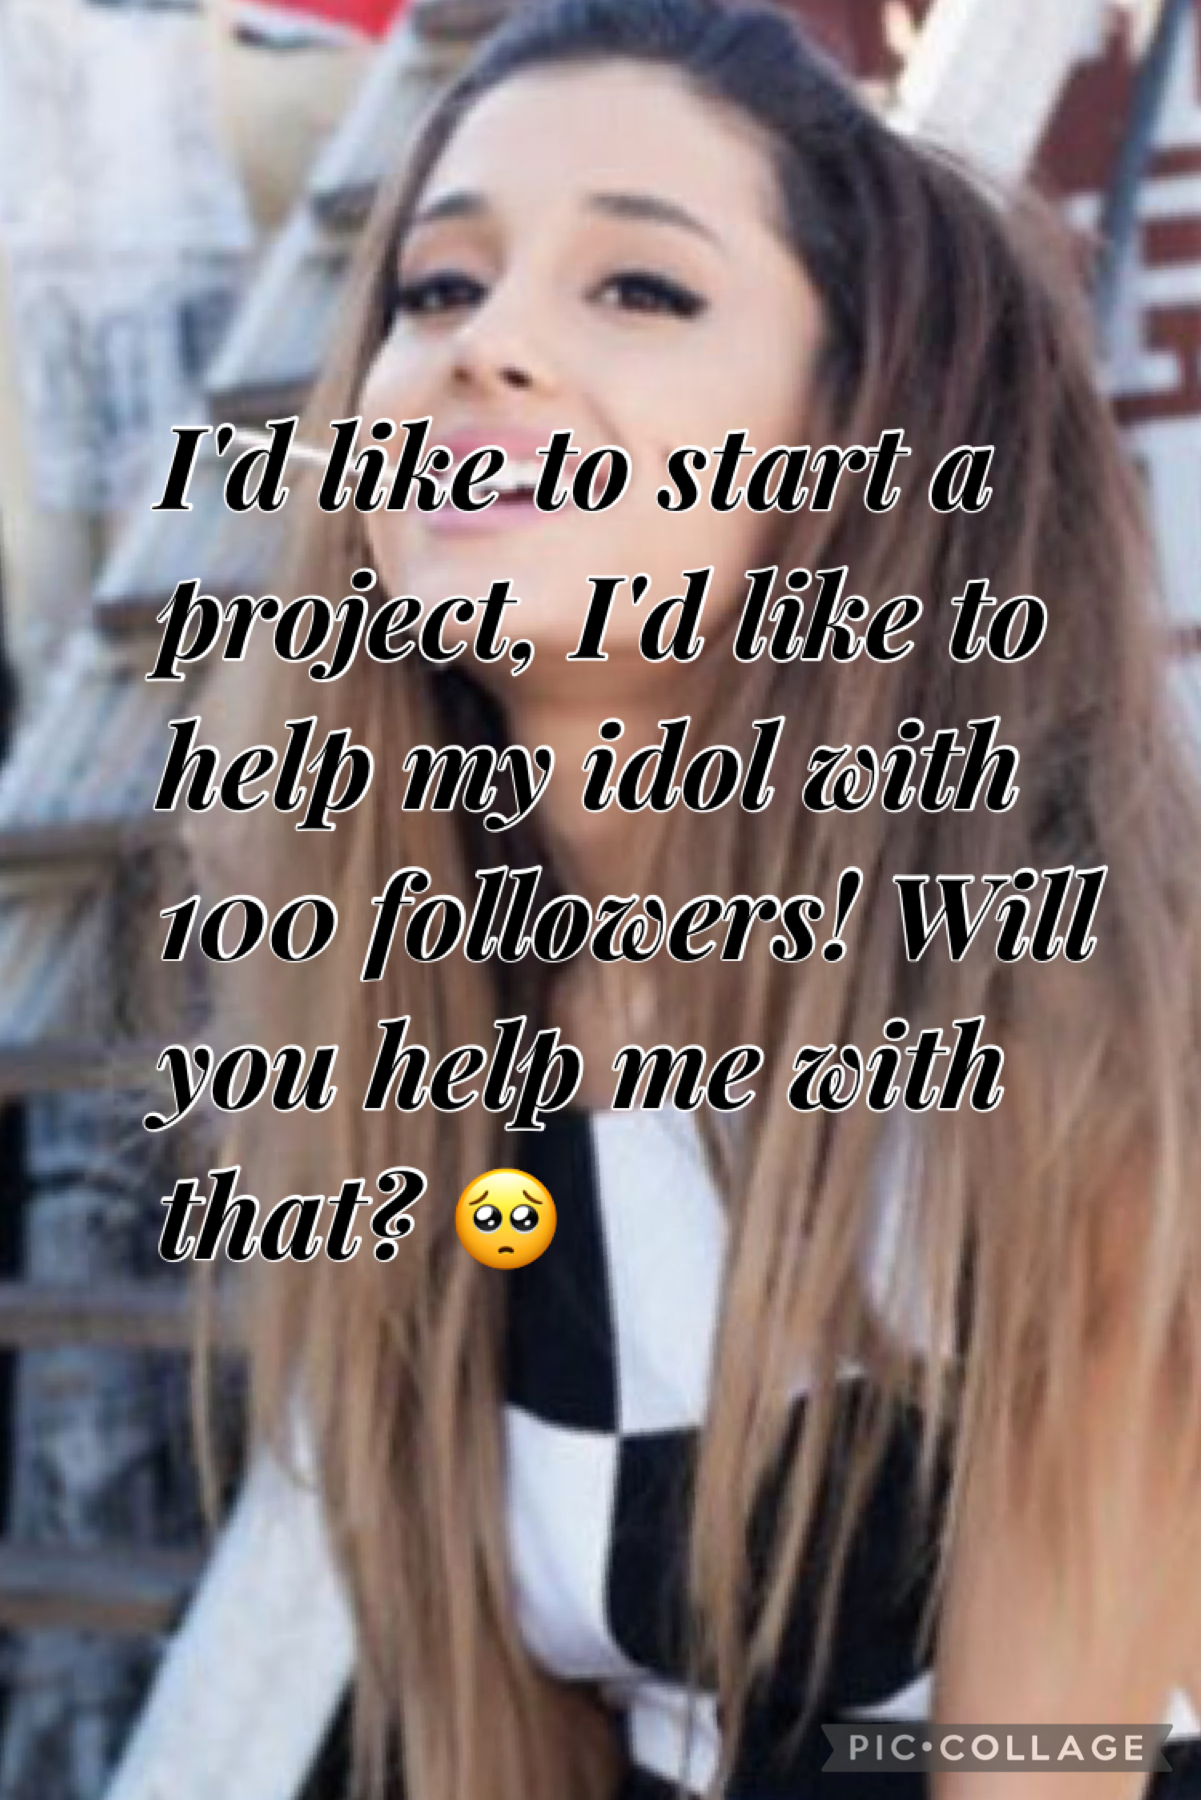 Pls help me with that!😙✌🏻❤️